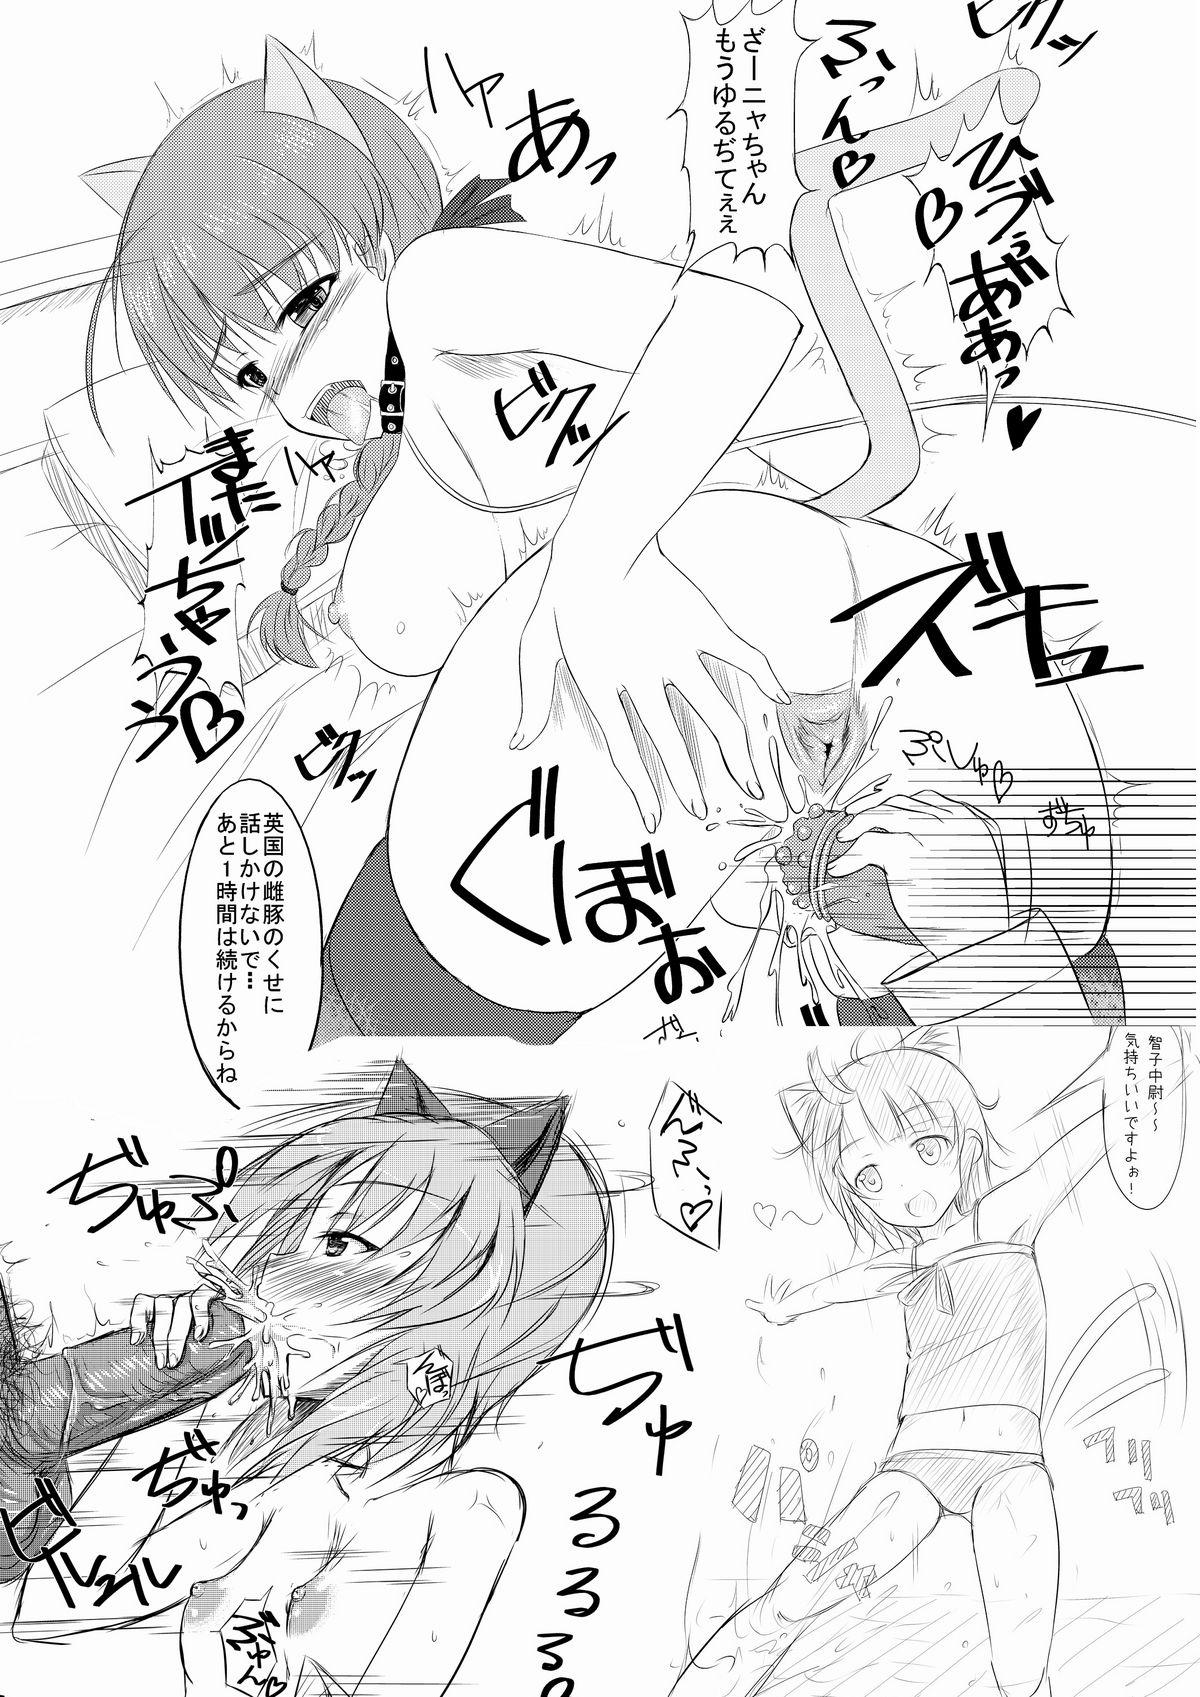 Branquinha 練習 お姉ちゃんとヘルマちゃん - Strike witches Amateur Xxx - Page 12